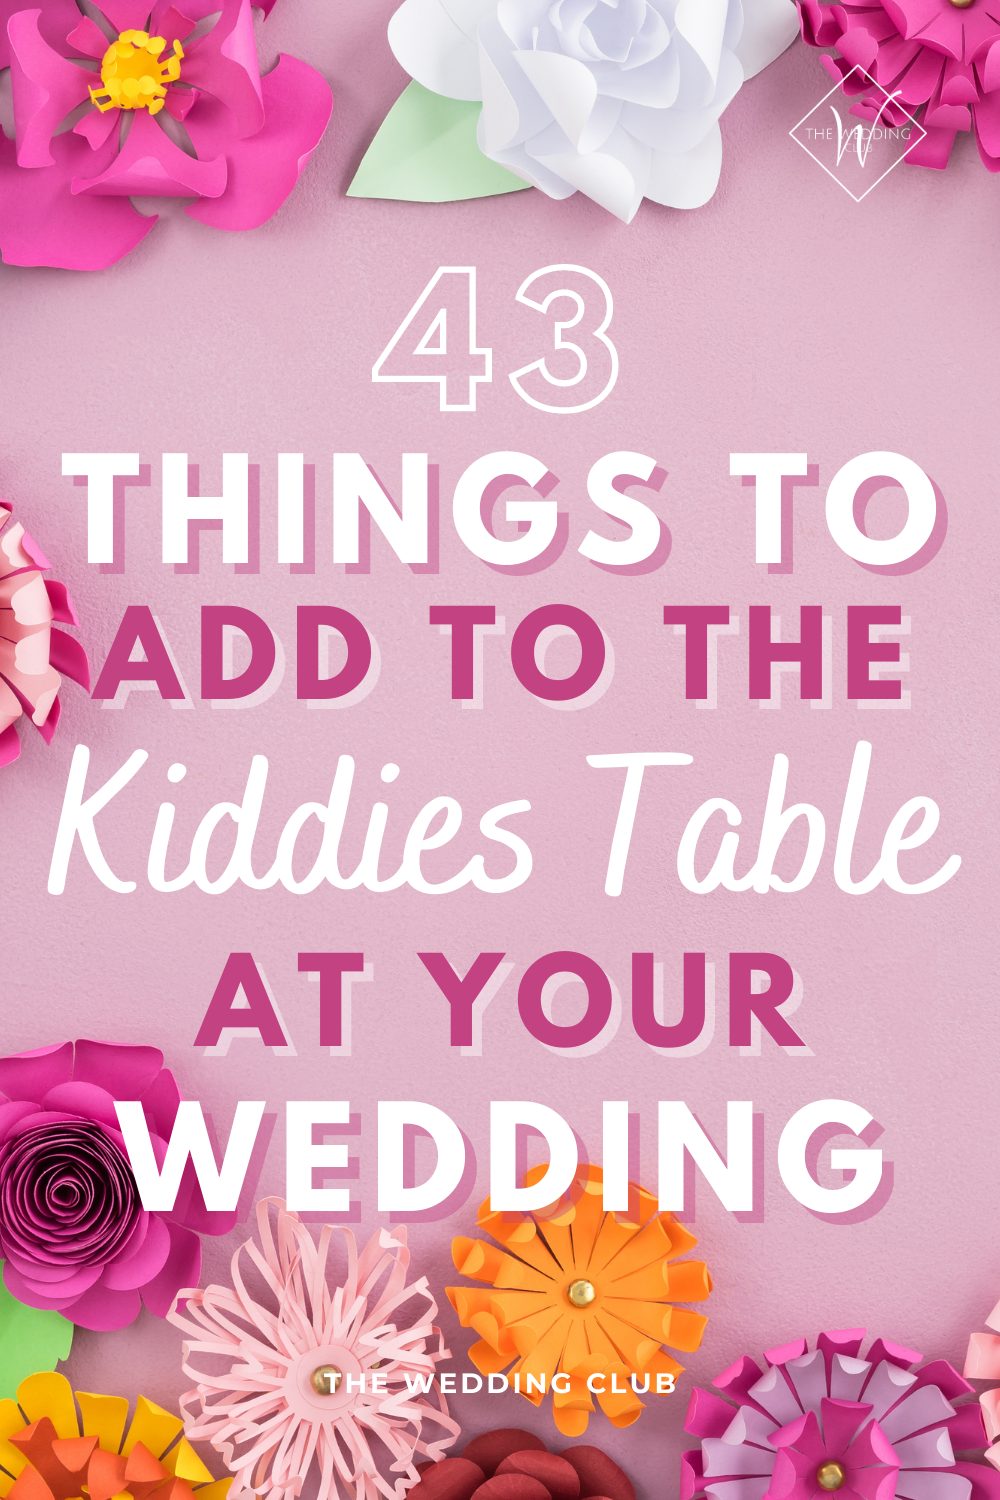 43 Things to add to the kiddies table at your wedding - The Wedding Club